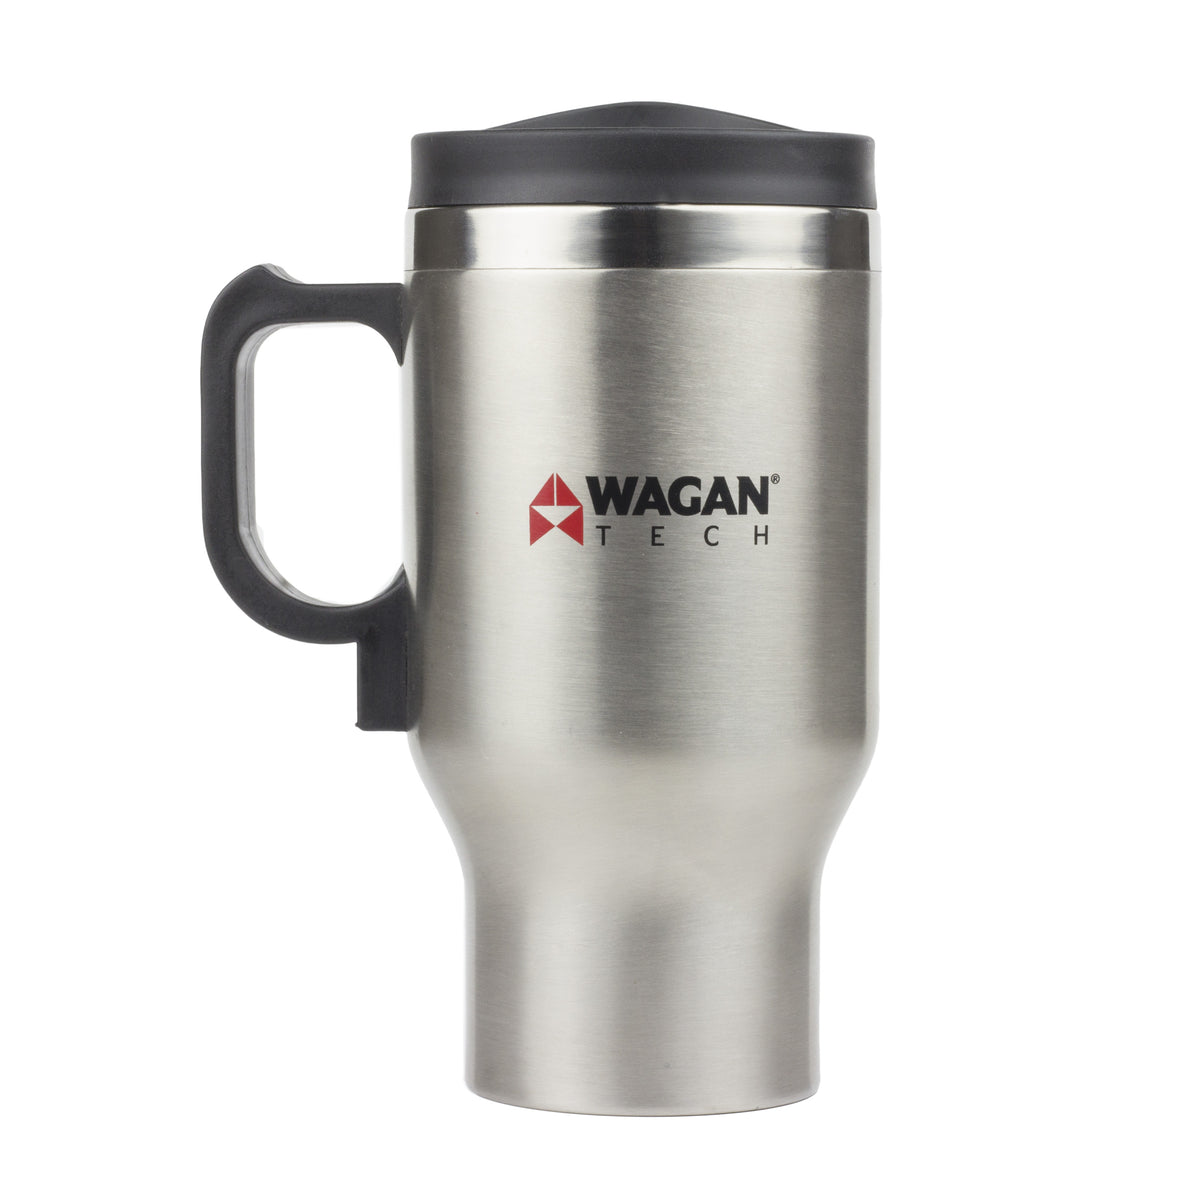 Wagan Tech 2227-1 Electronic Heated Travel Mug - Stainless Steel - 12V - 16 oz - 2 pack